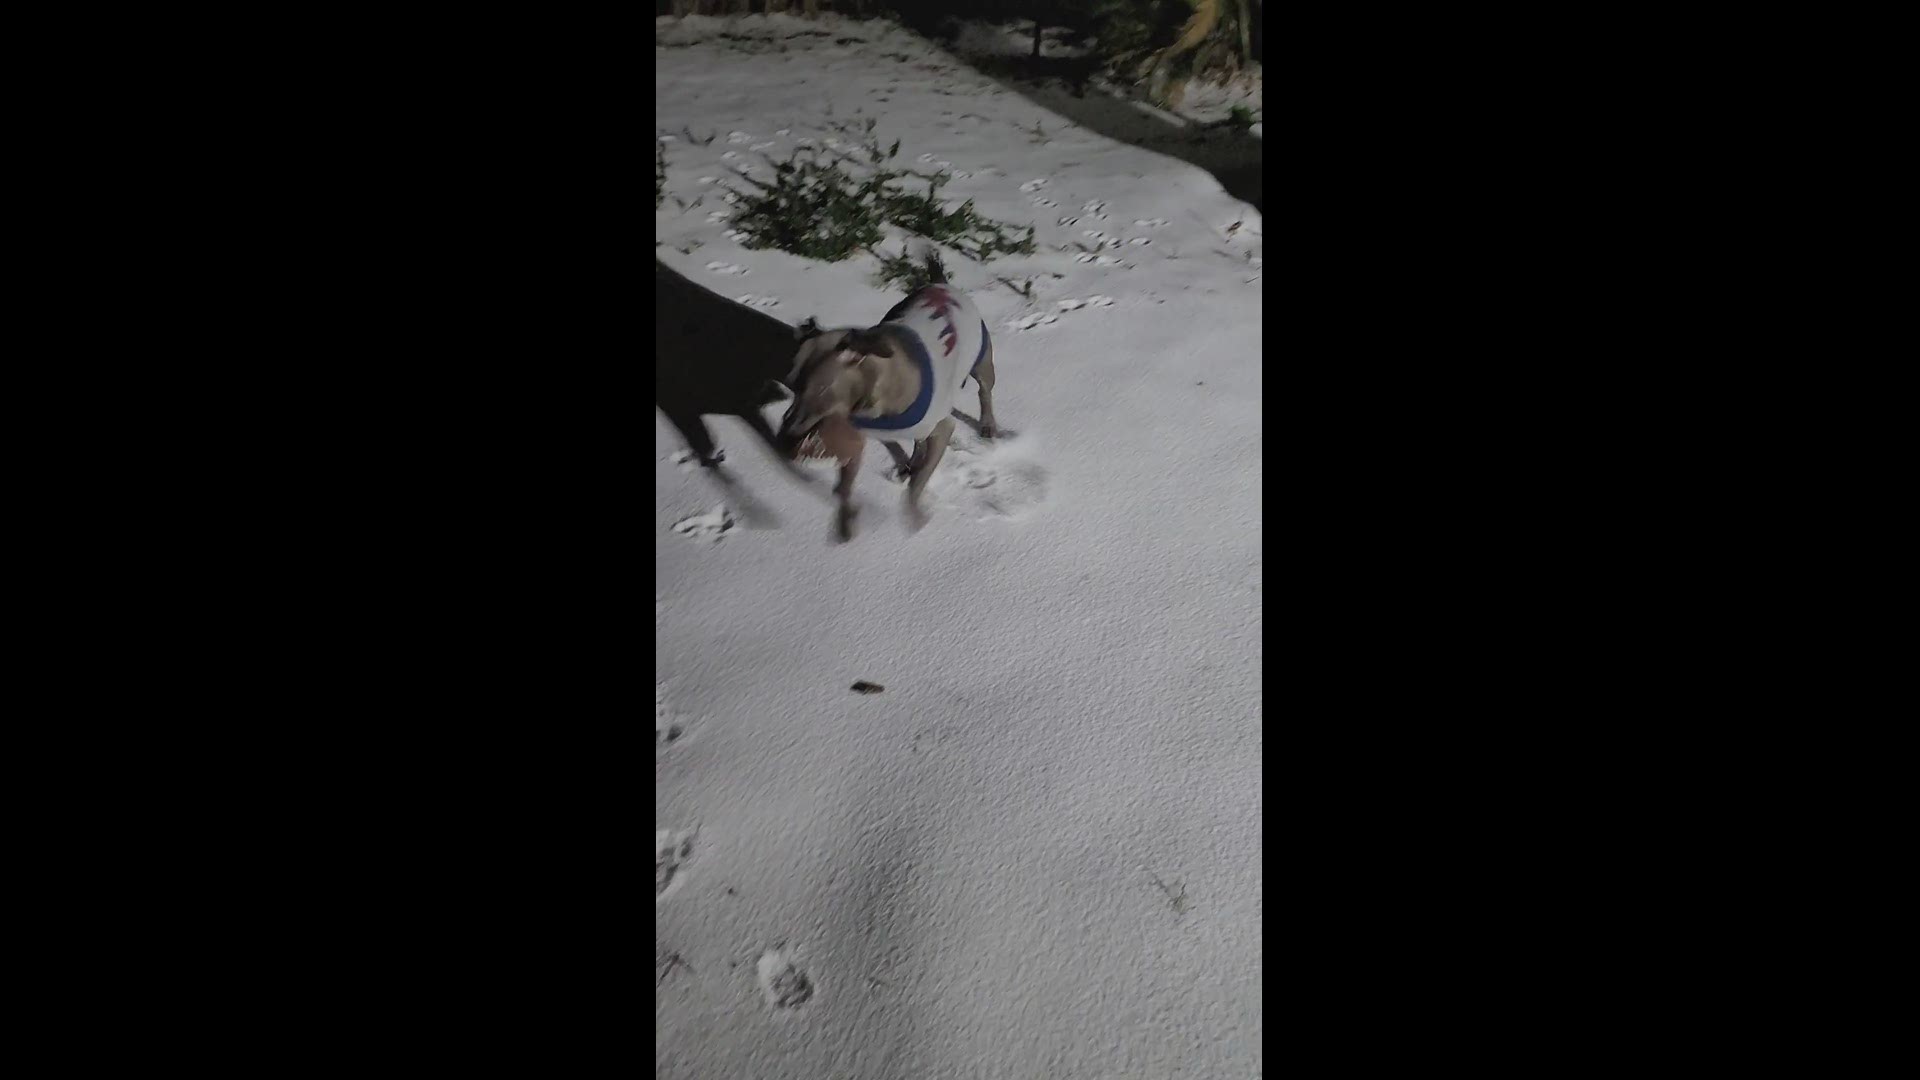 Spring resident Kristina Hernandez brings her puppy out for his first time playing in the snow!
Credit: Kristina Hernandez